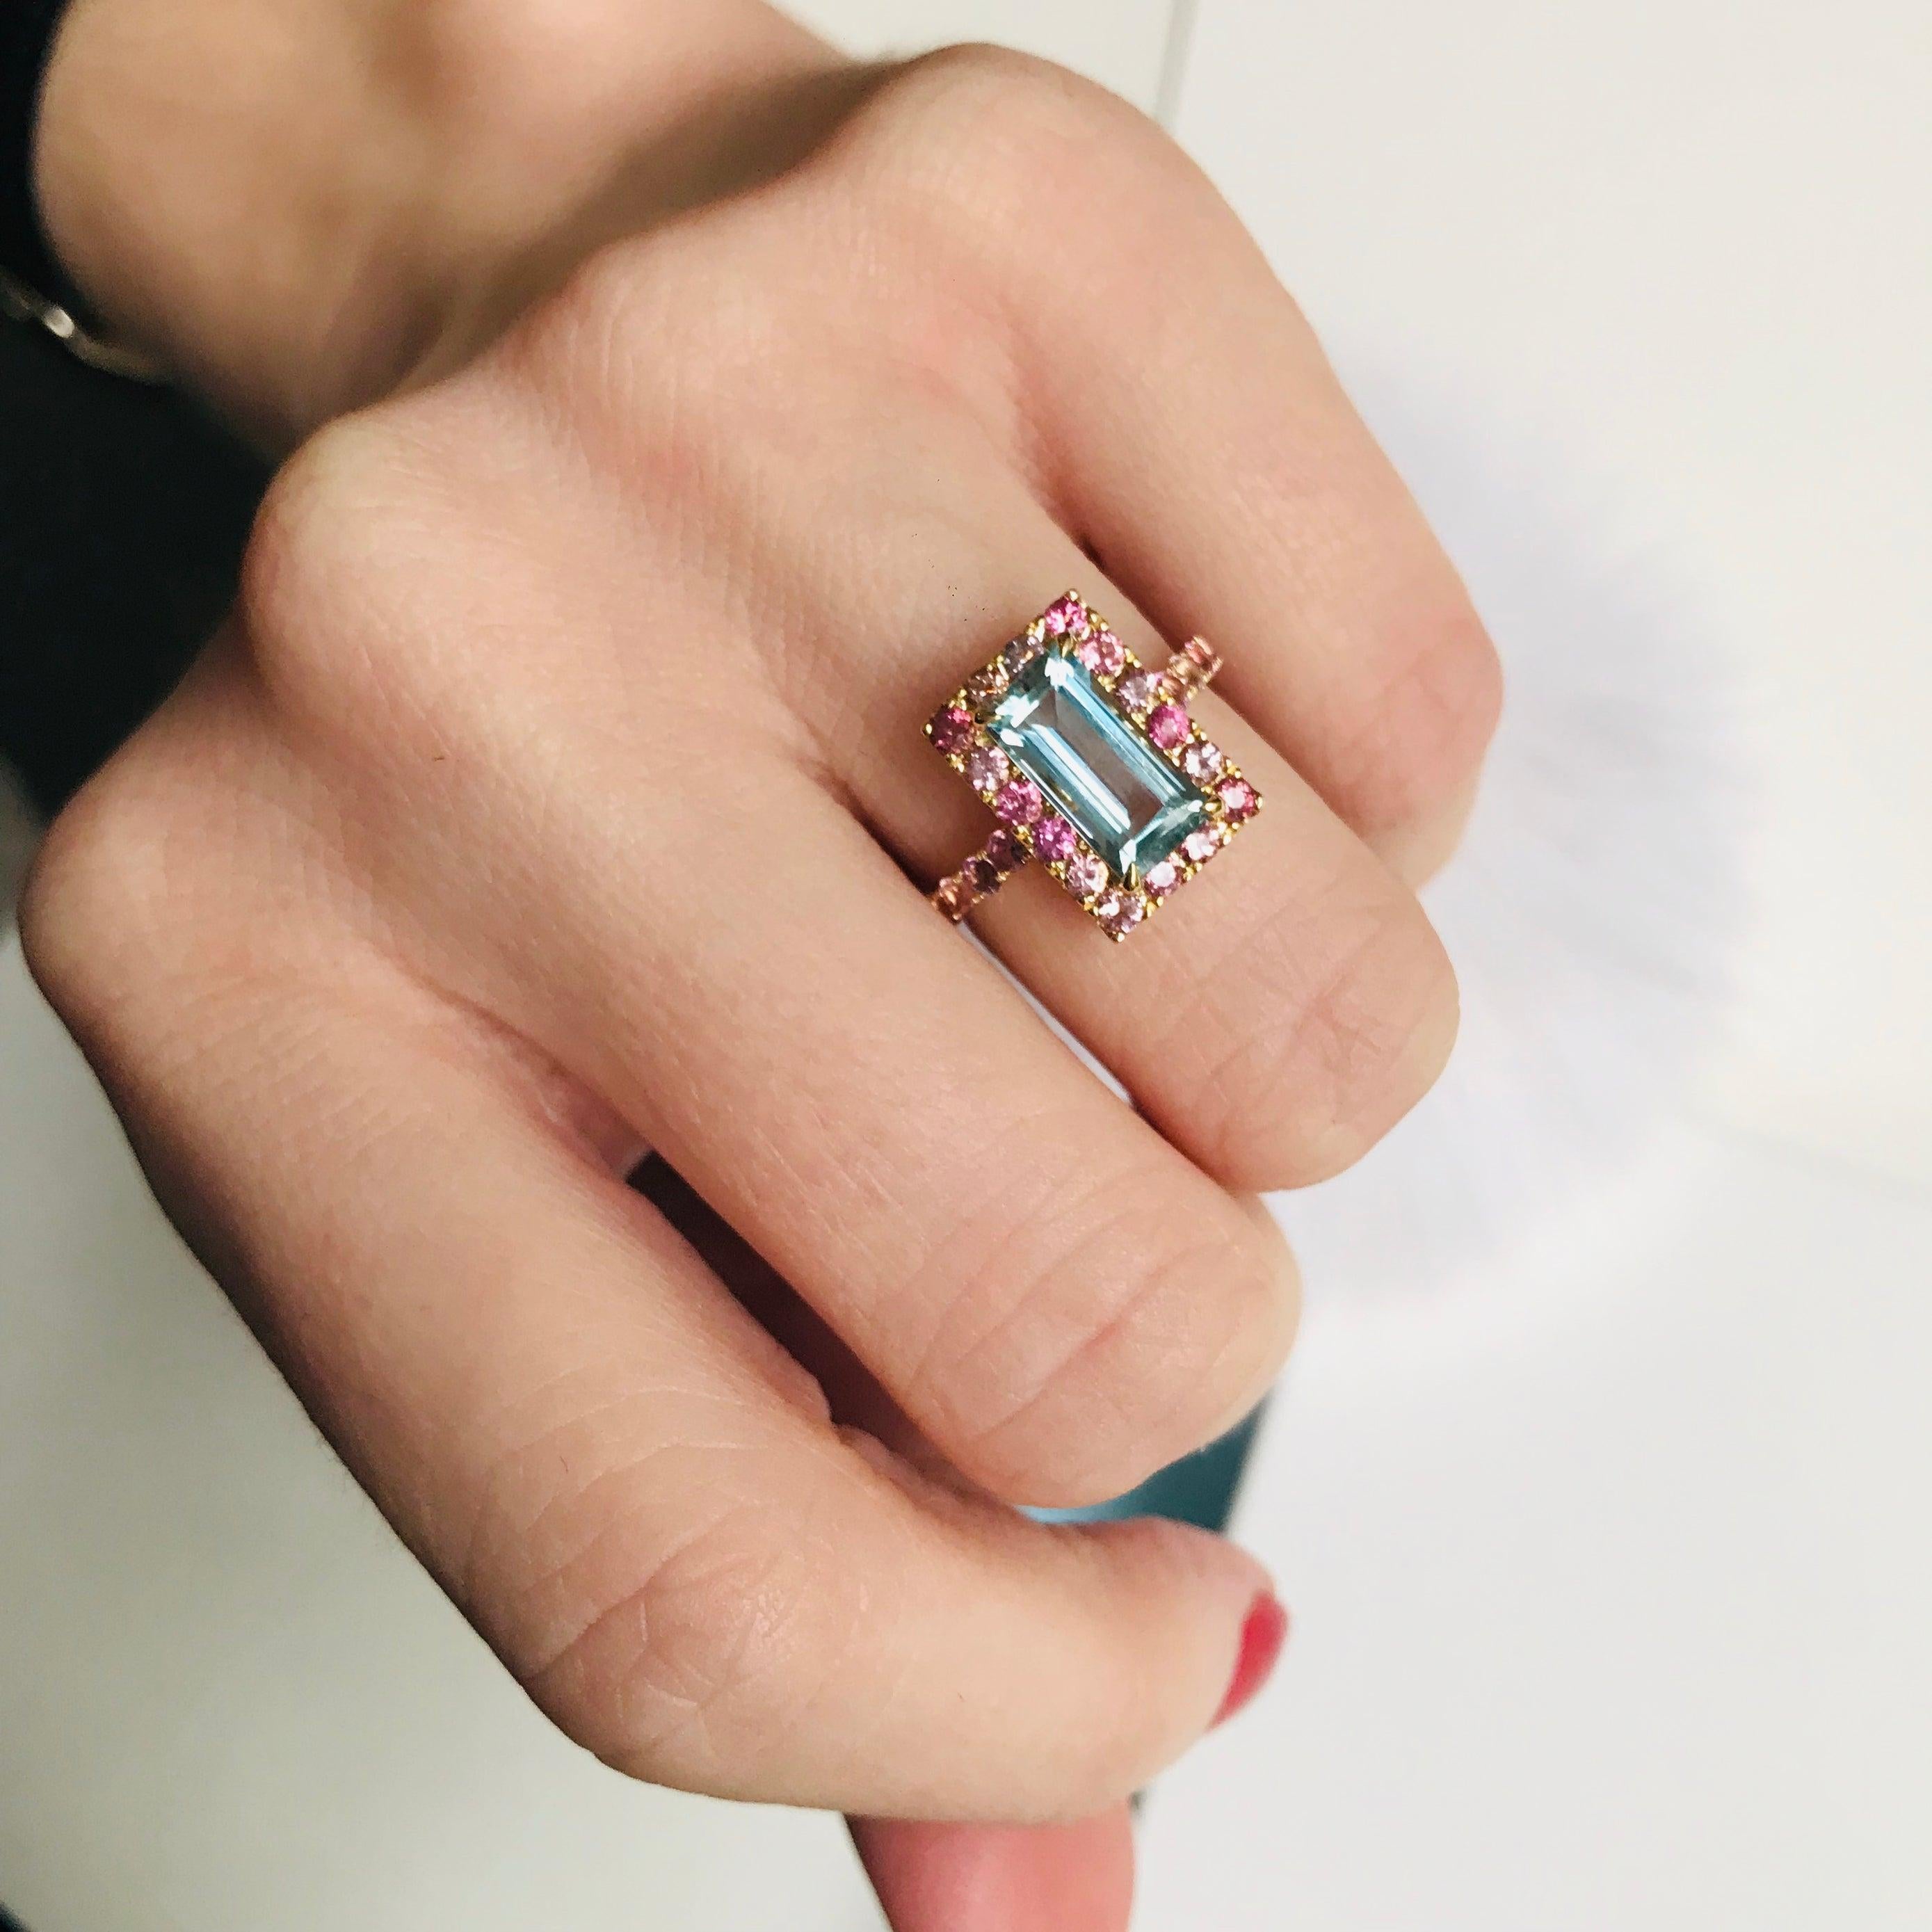 This youthful design showcases a gorgeous baguette aquamarine surrounded by an array of colorful pink tourmalines. . 

Our Aquamarine is as clear and blue as the cleans of the Maldives. A sprinkling of dazzling tourmalines in all shades of pinks